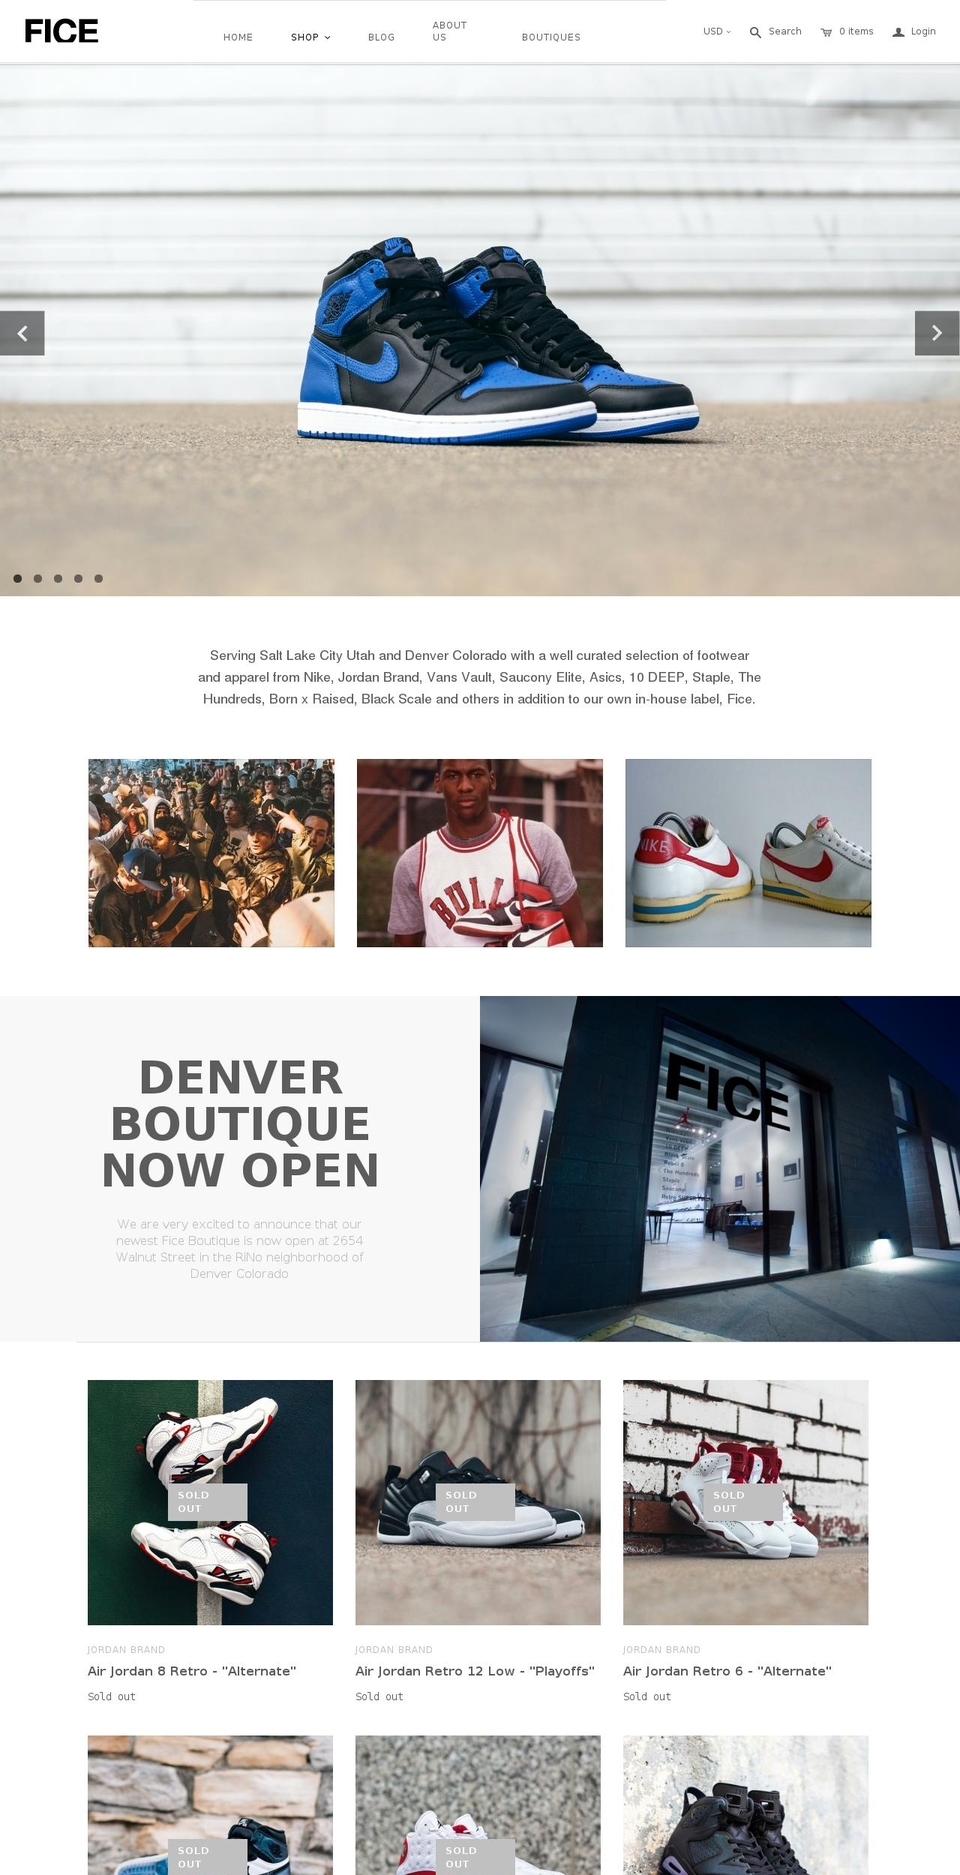 Editions Shopify theme site example ficegallery.com